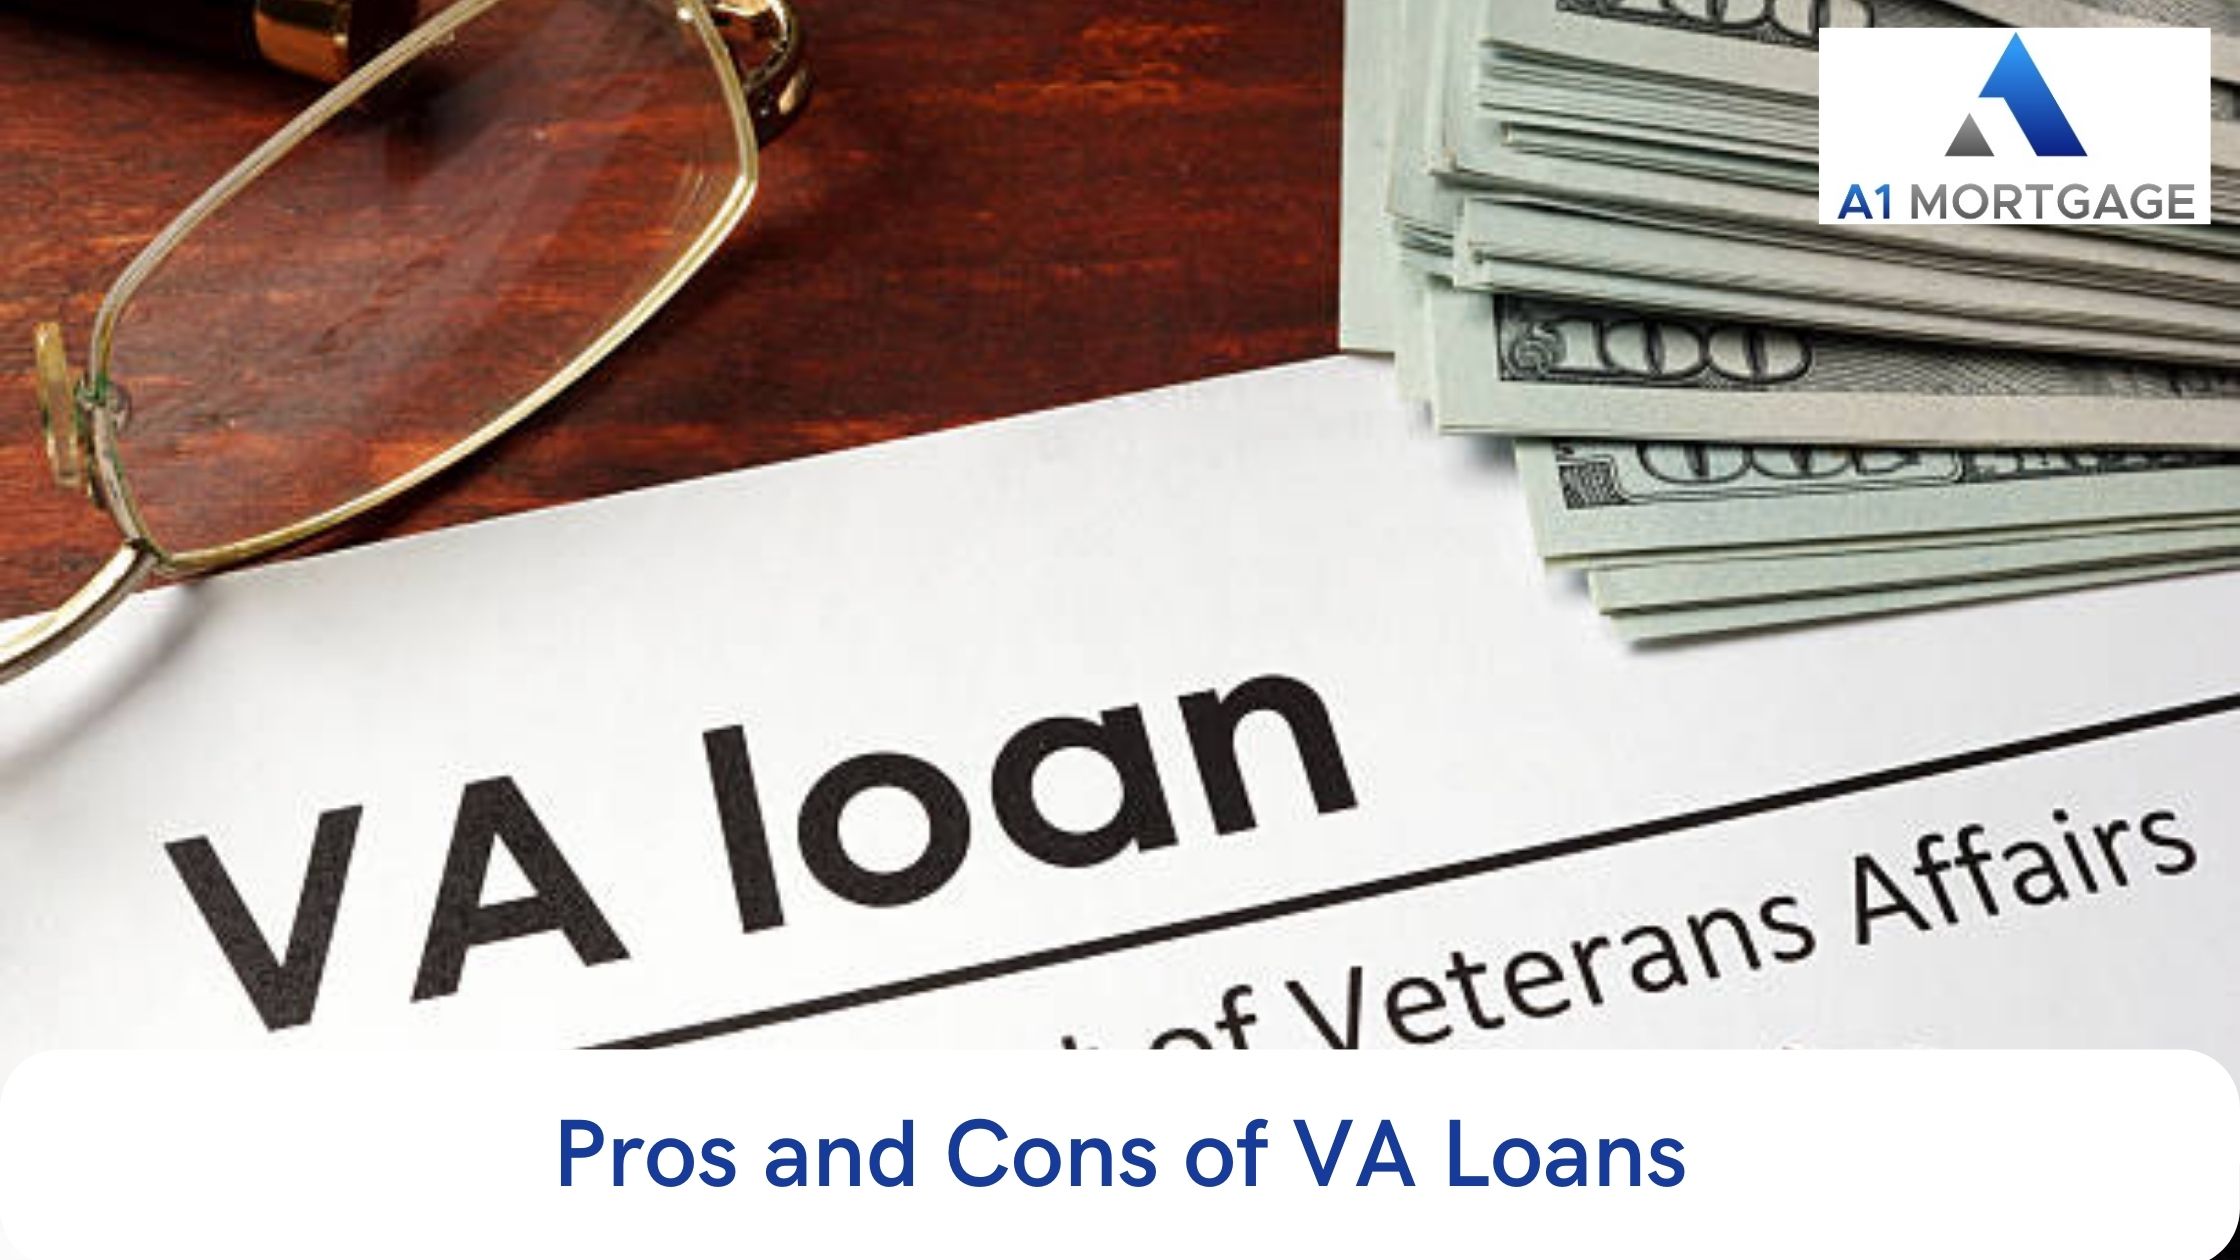 Pros and Cons of VA Loans